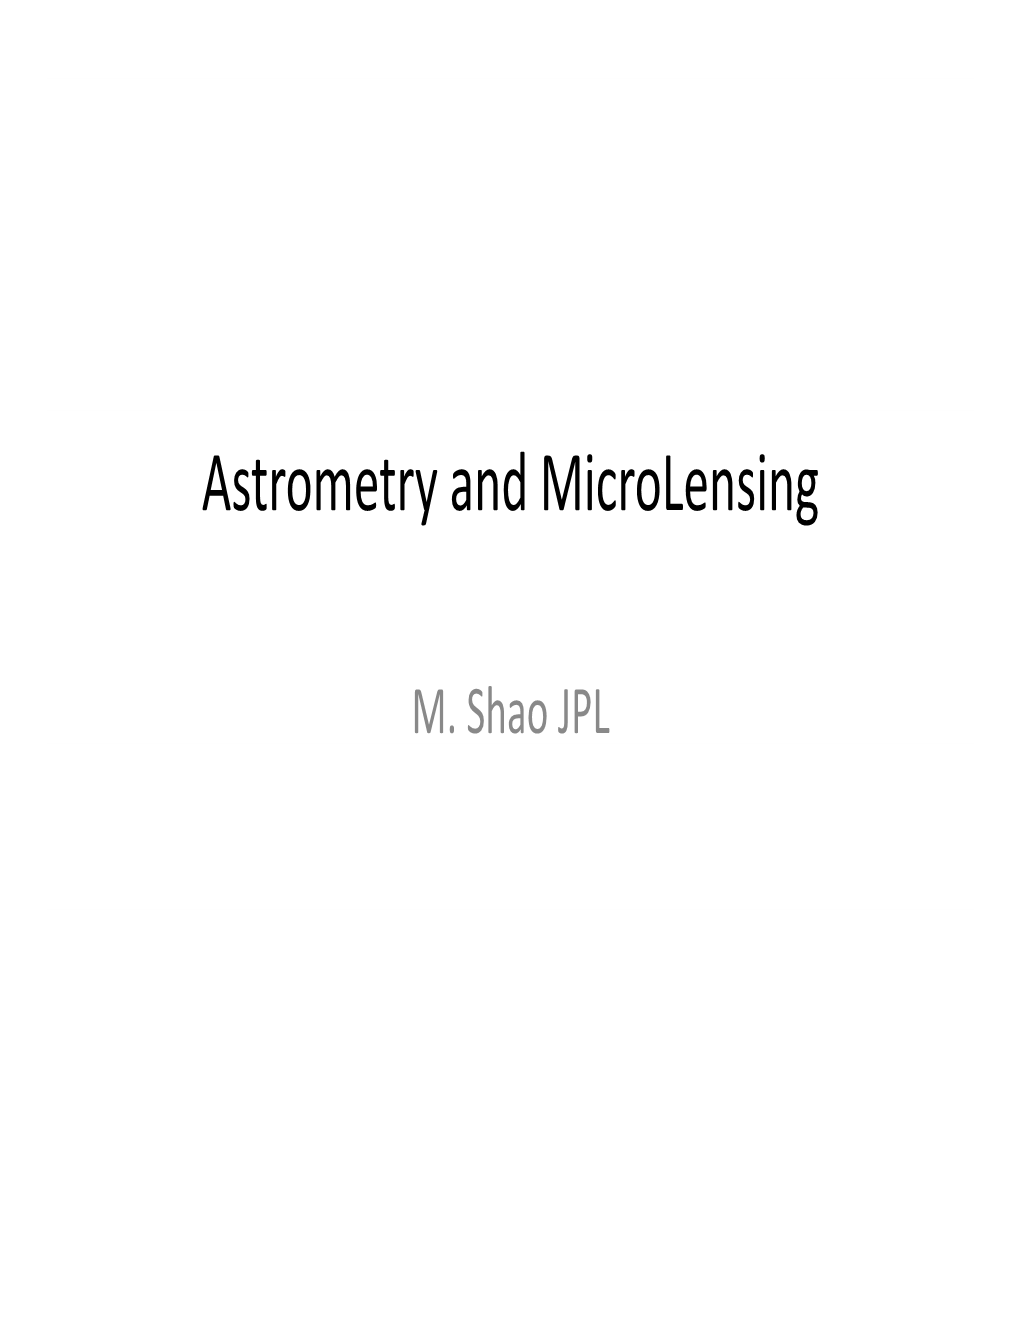 Astrometry and Microlensing